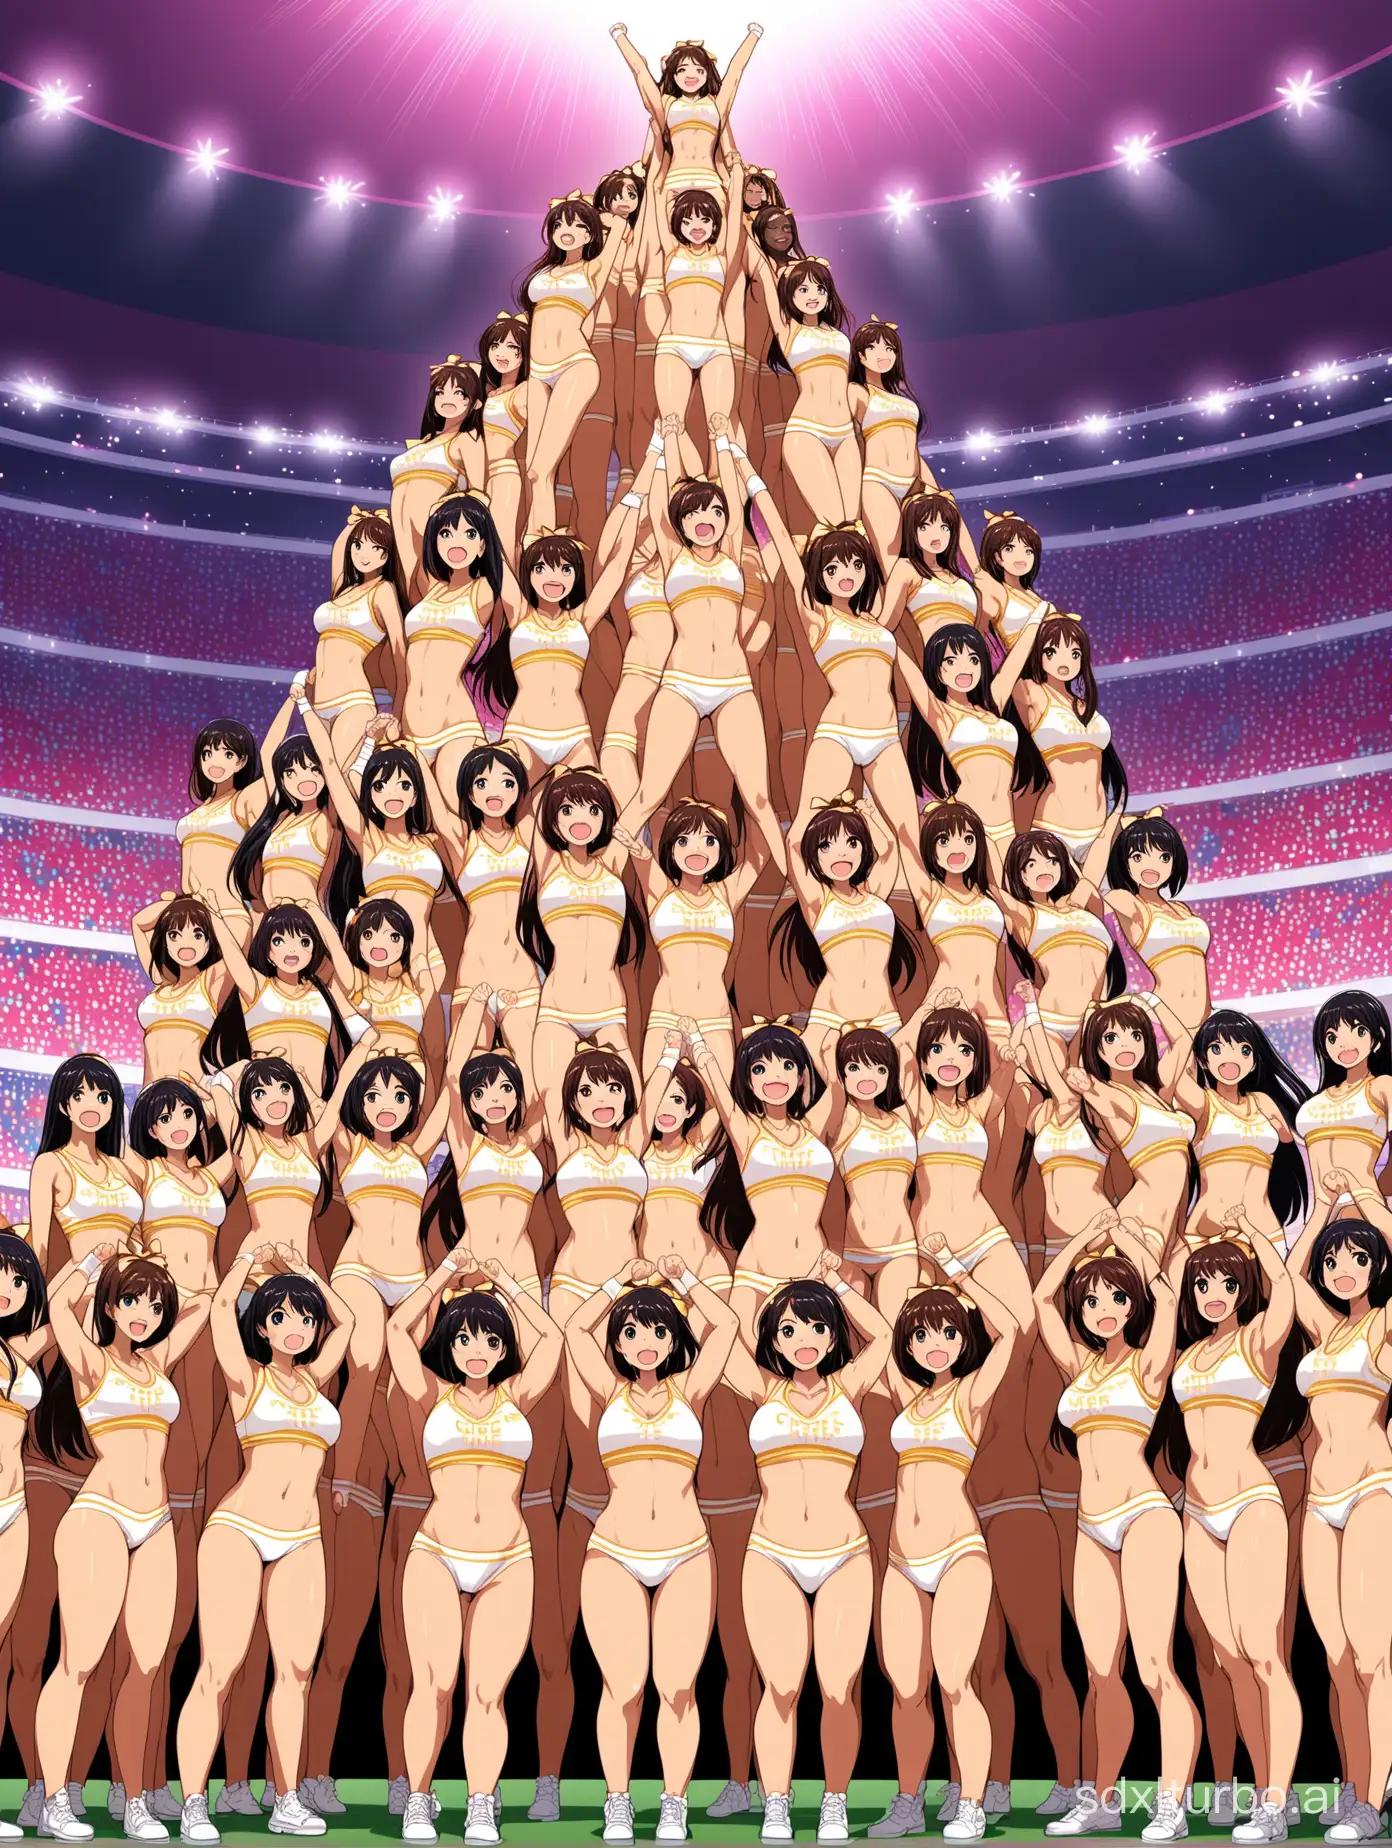 Cheerleader-Pyramid-Competition-Tiny-Woman-Leads-Diverse-Nude-Fitness-Models